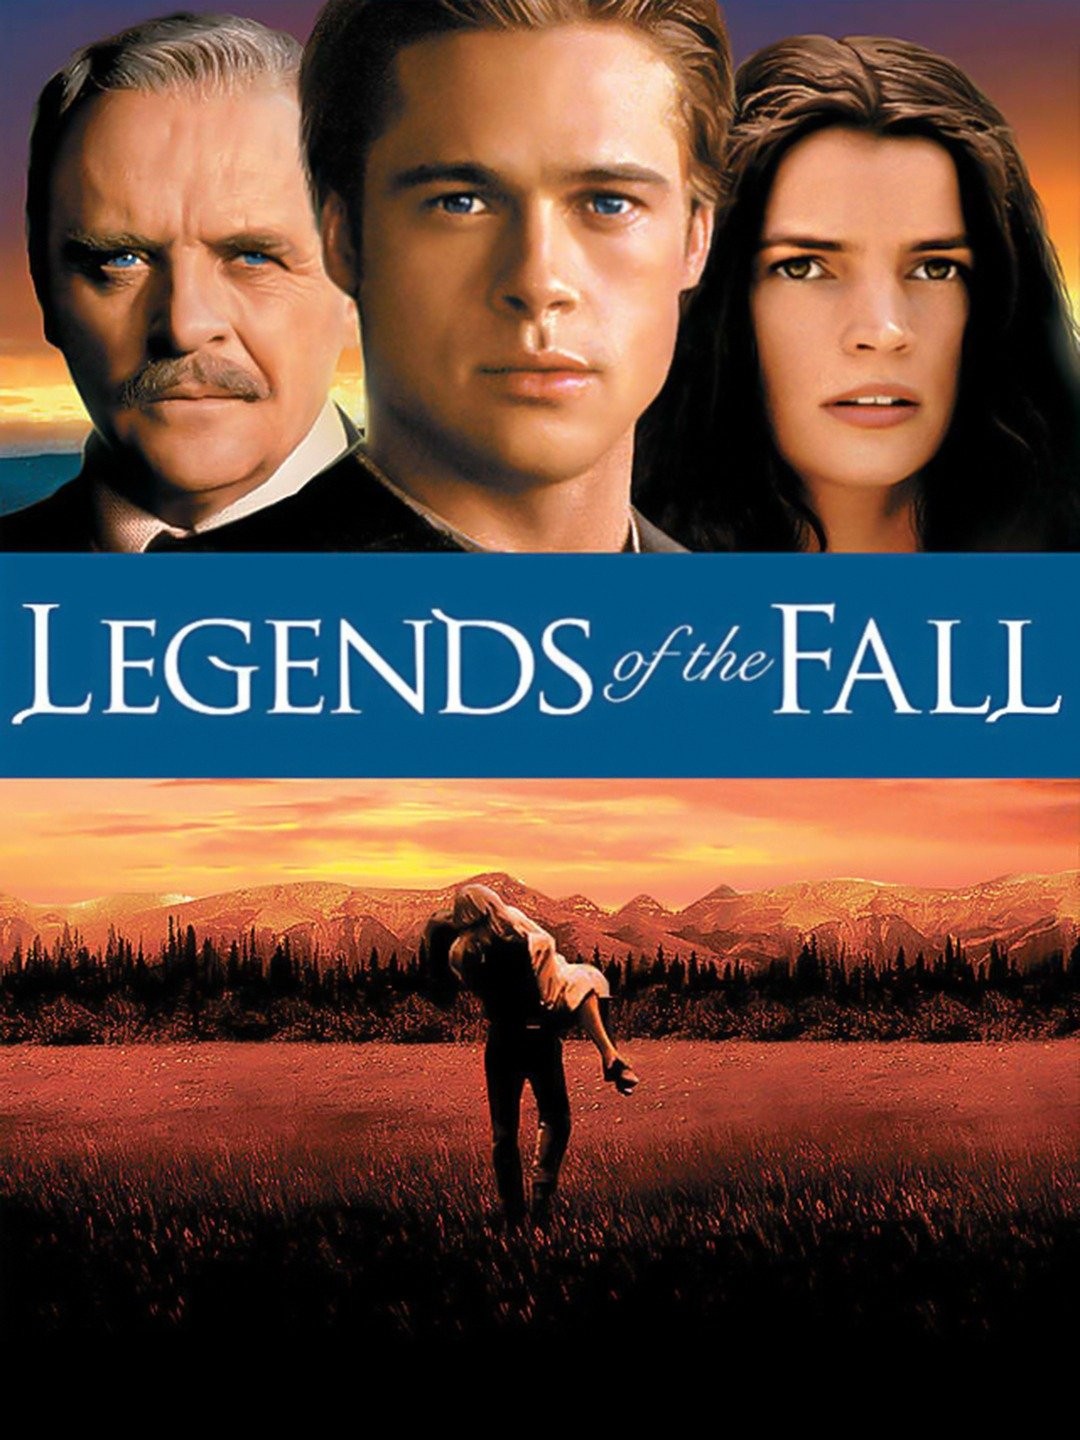 Legends of the Fall - Metacritic